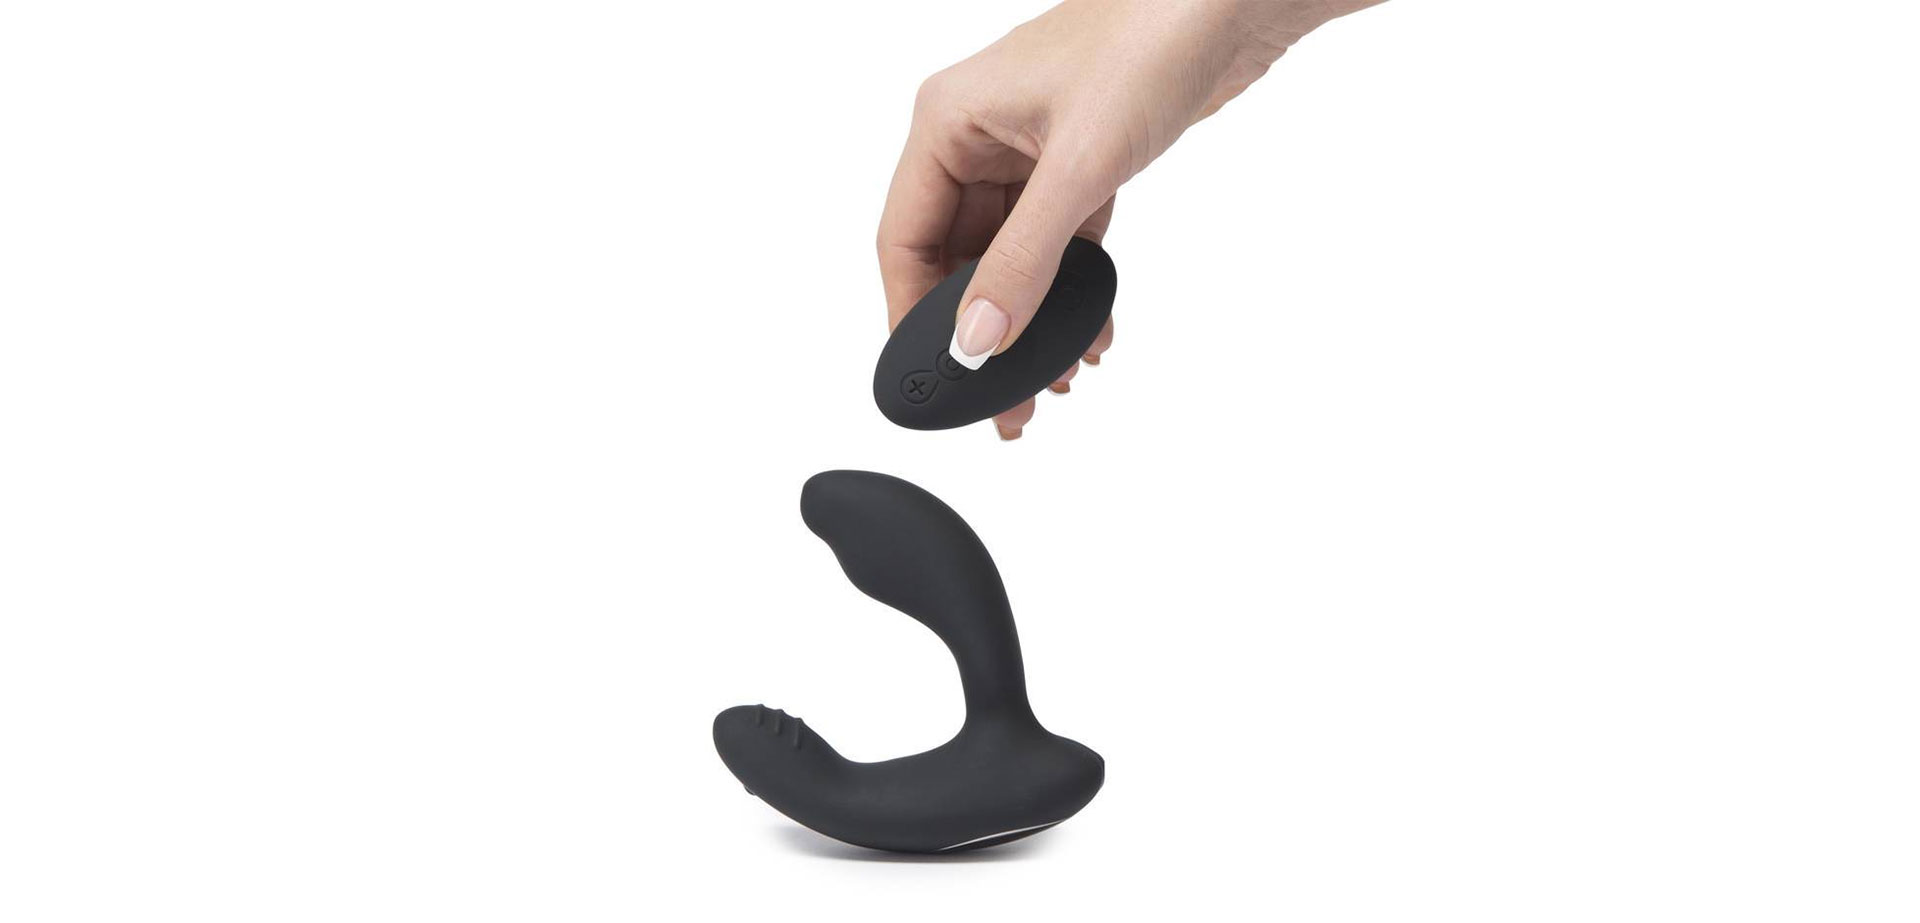 Remote controlled prostate massager.